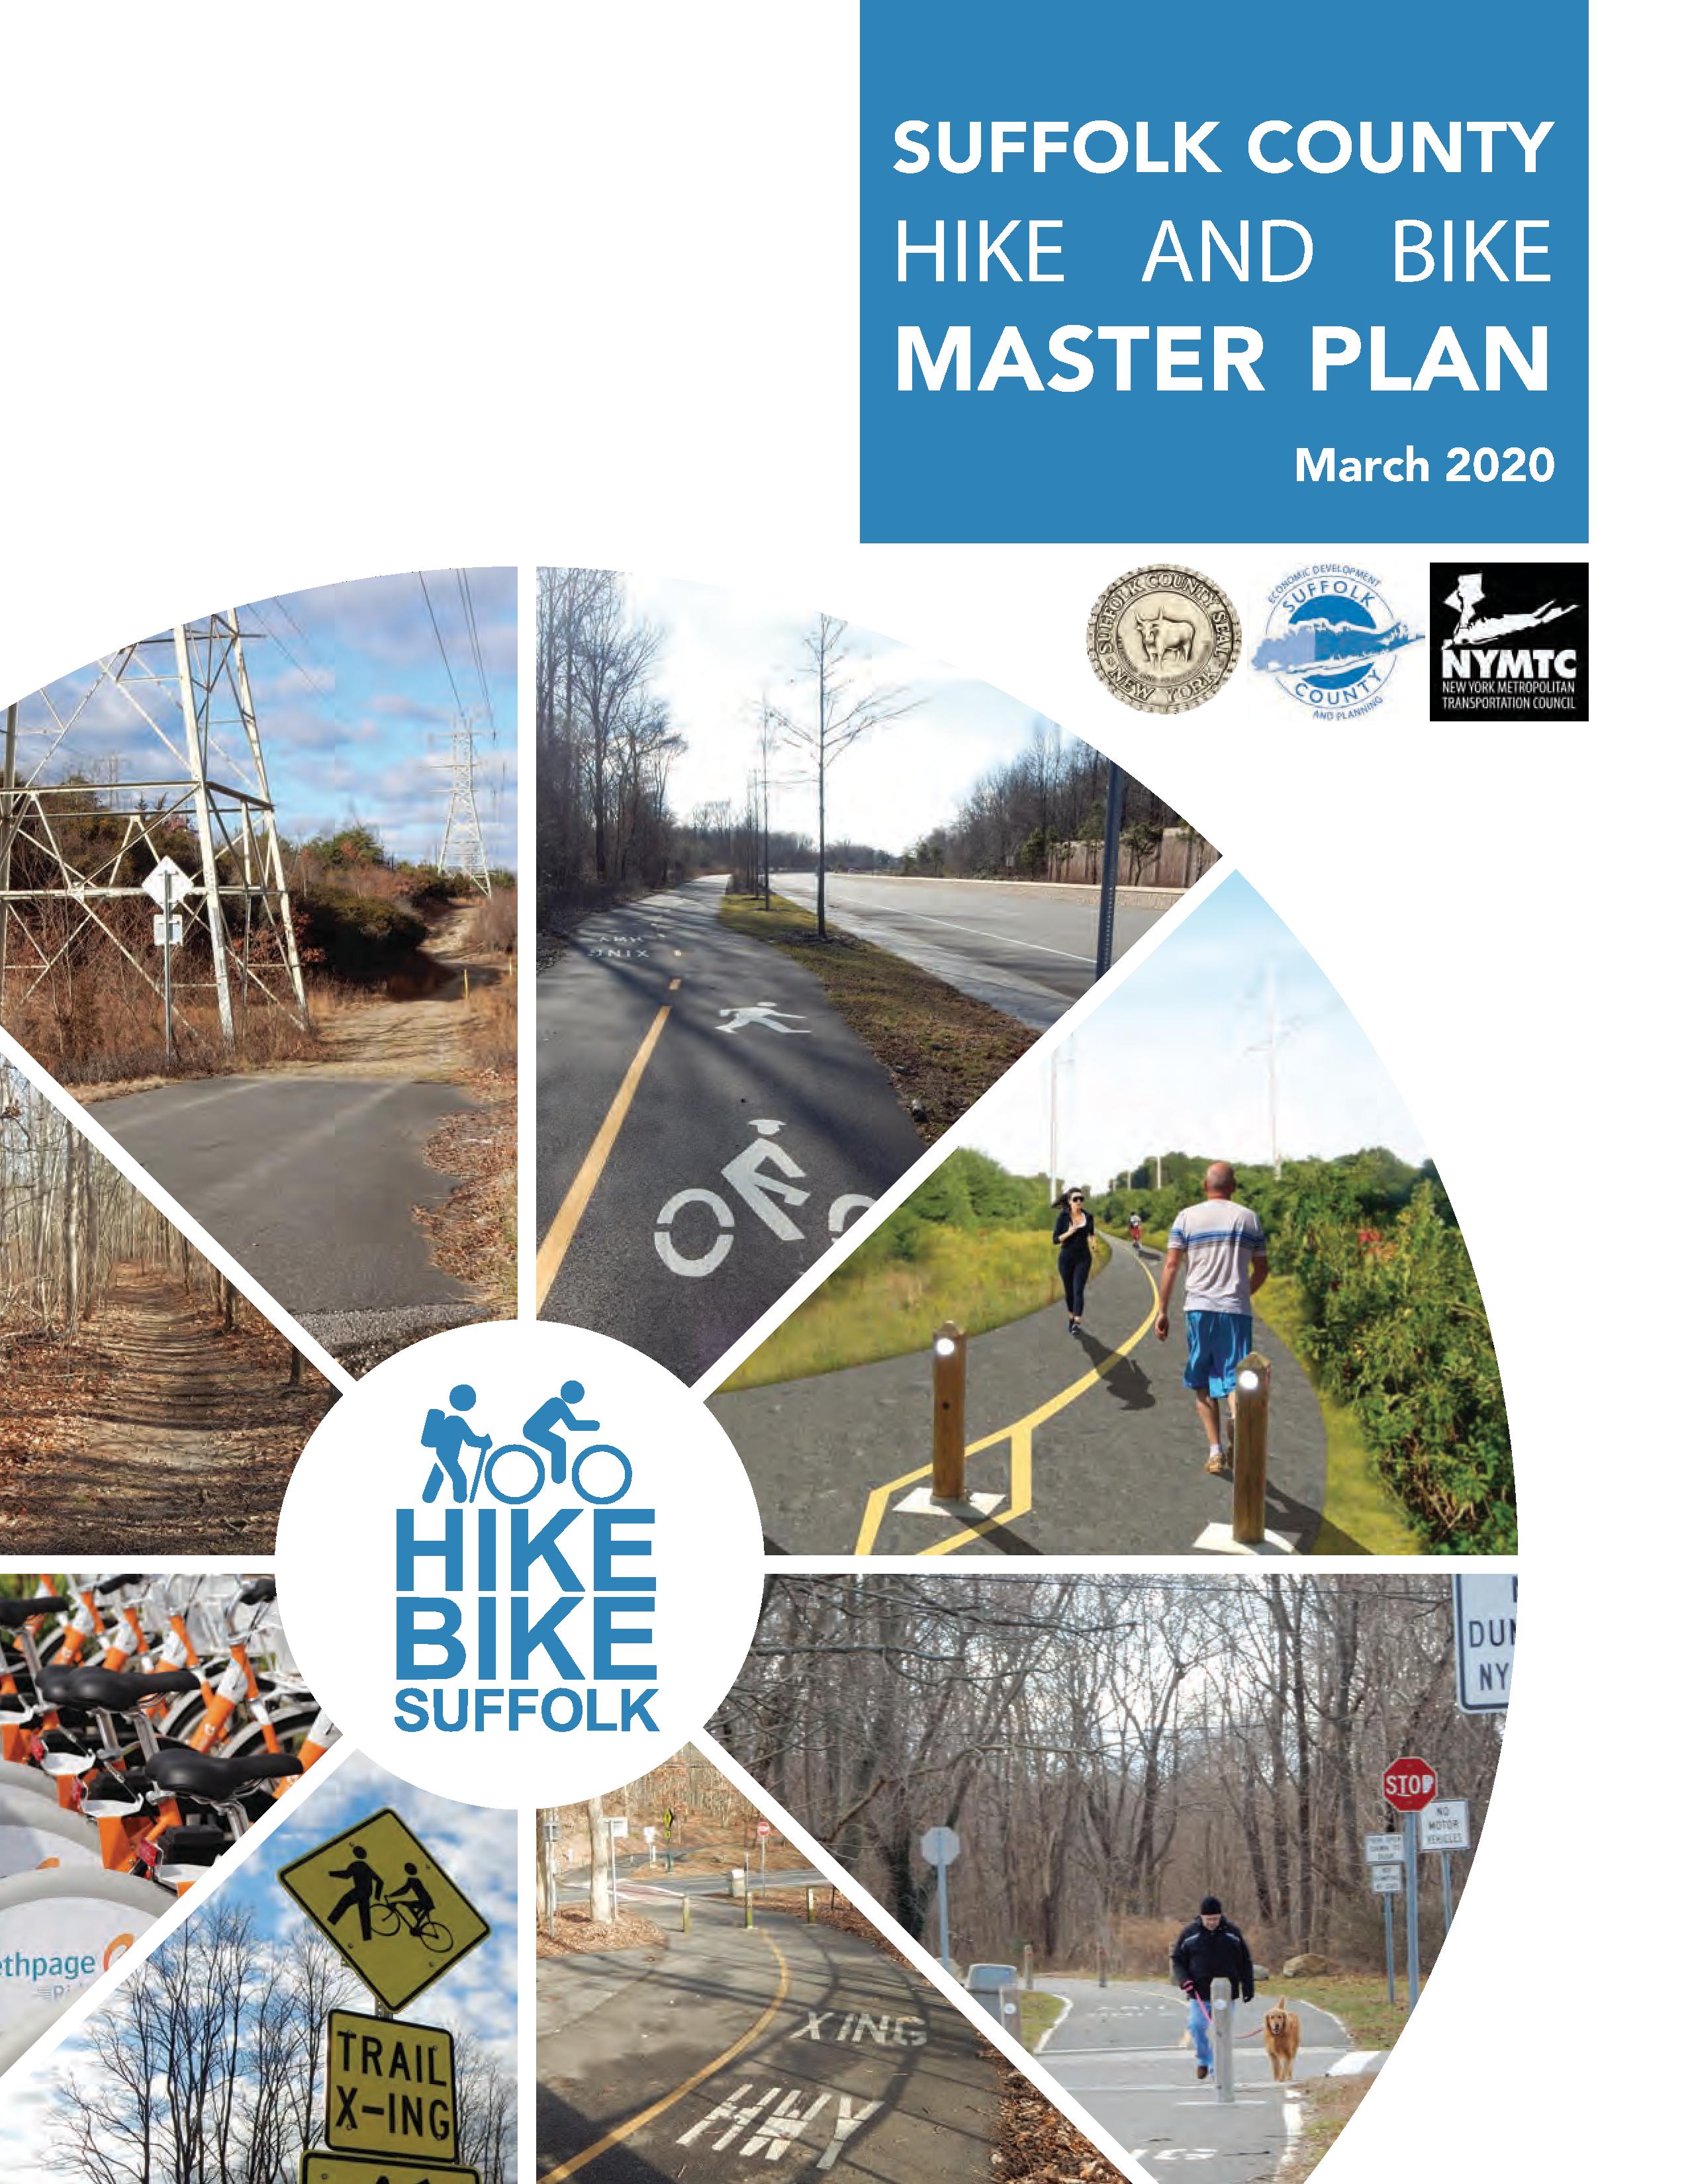 Suffolk County Hike and Bike Master Plan March 2020 flyer